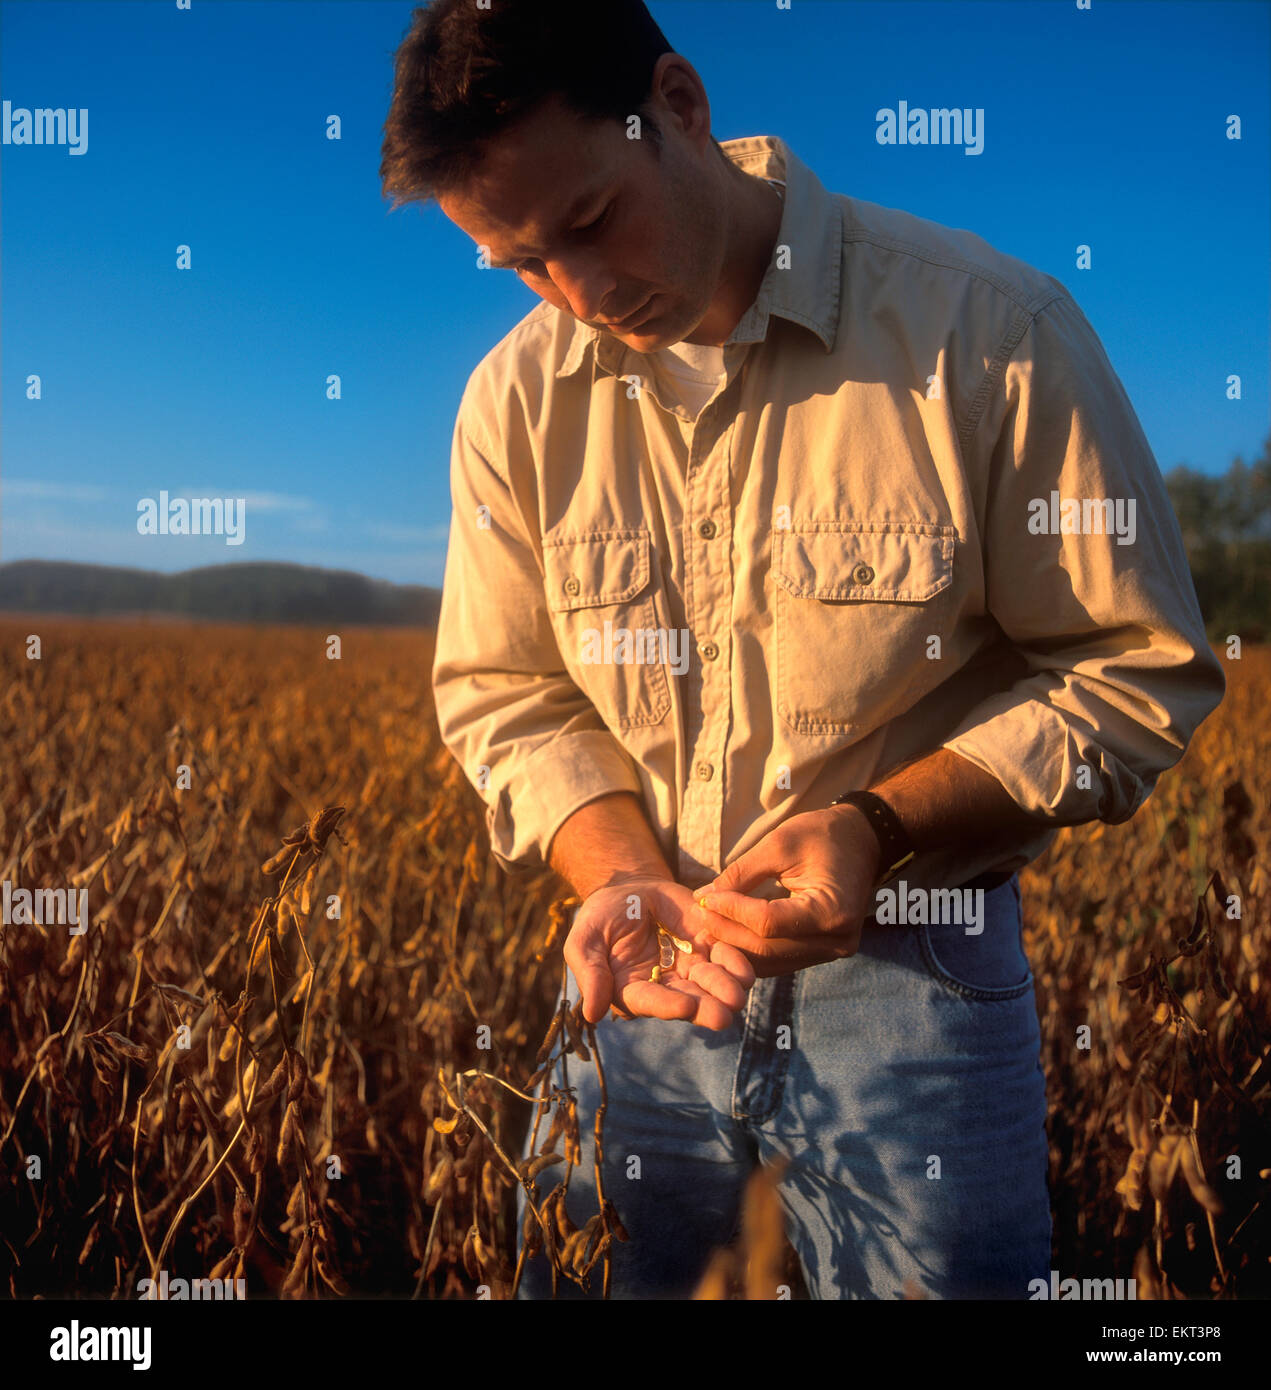 Agriculture - A farmer inspects mature, harvest ready soybean pods in the field just prior to the harvest / Ontario, Canada. Stock Photo